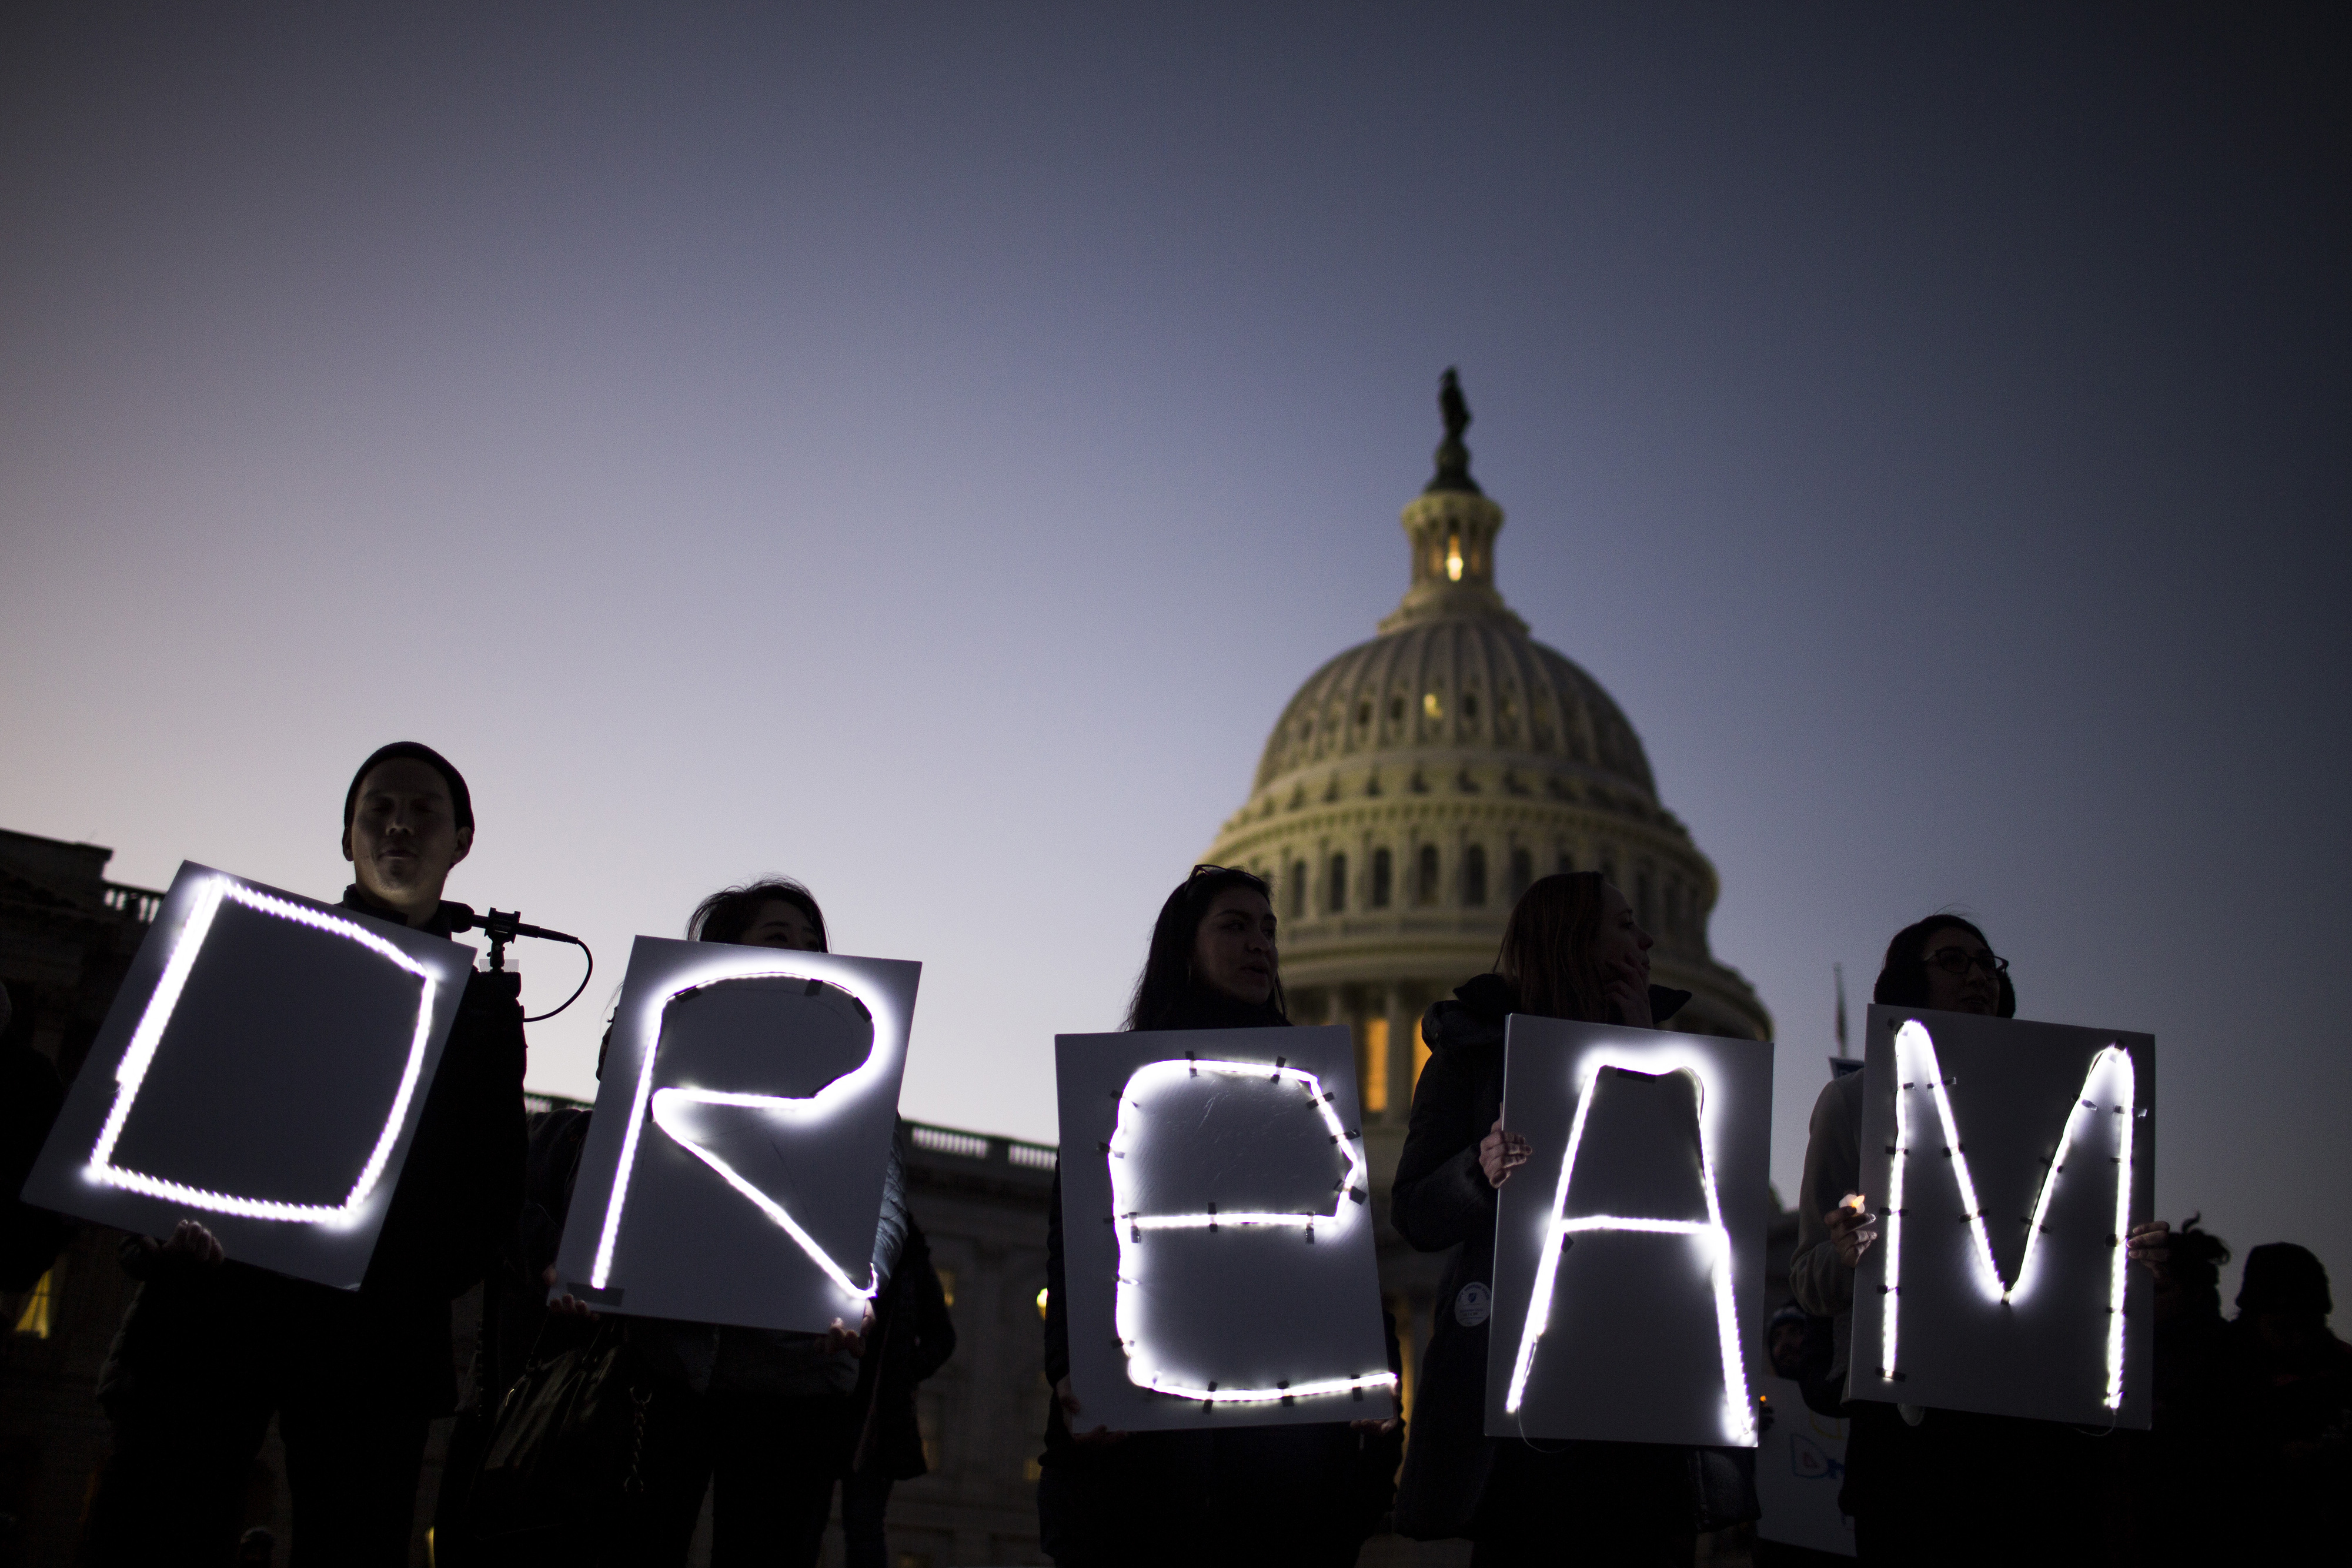 Demonstrators hold illuminated signs during a rally supporting the Deferred Action for Childhood Arrivals program (DACA), or the Dream Act, outside the U.S. Capitol building in Washington, D.C., U.S., on Jan. 18, 2018. (Zach Gibson—Bloomberg/Getty Images)